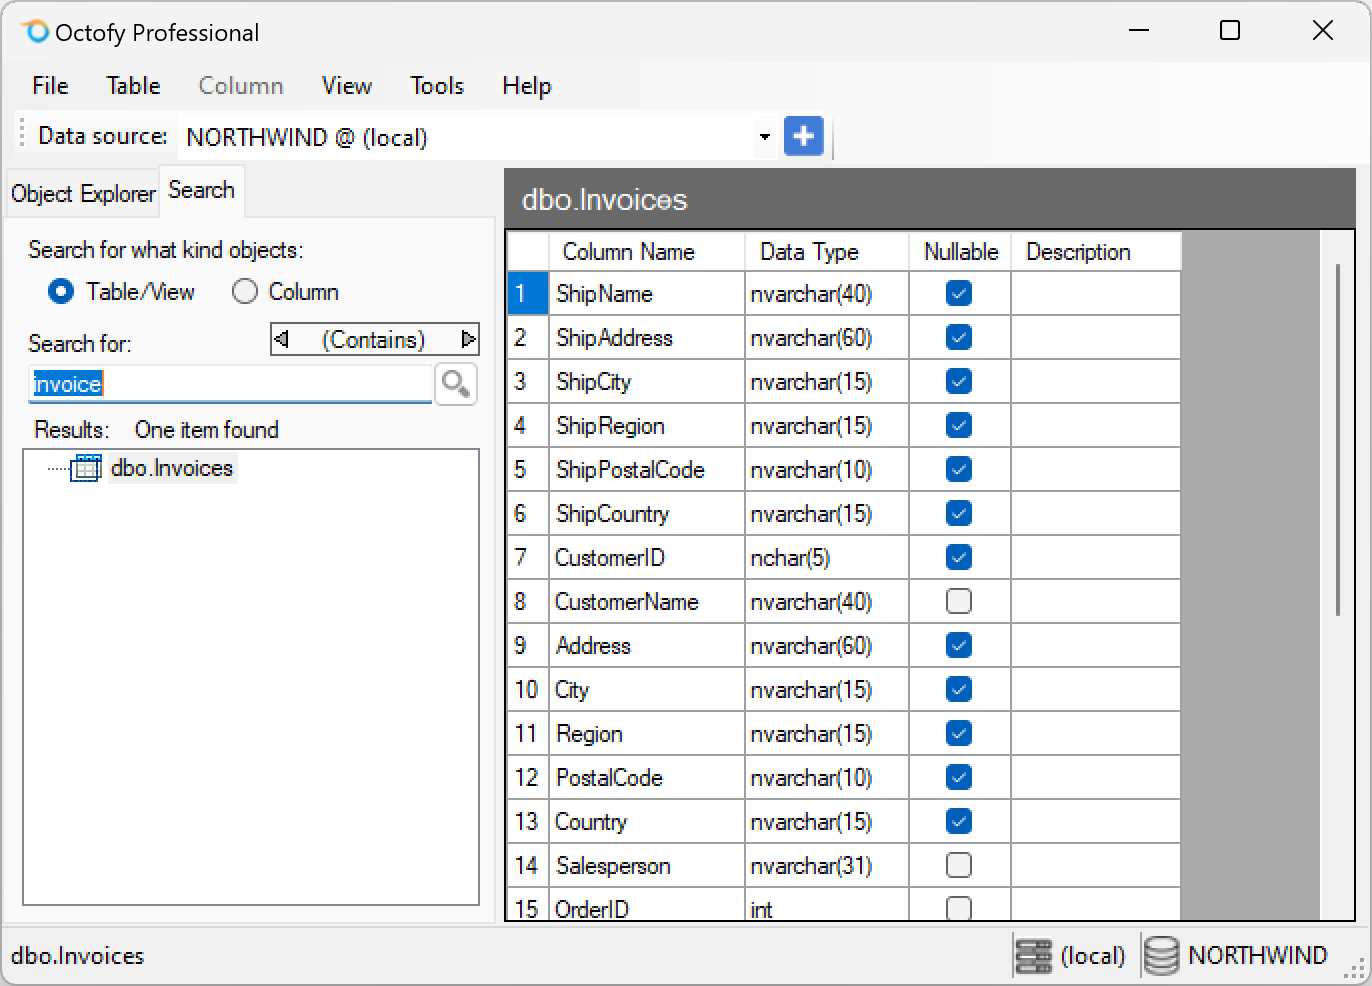 Main windows: Database object explorer and search